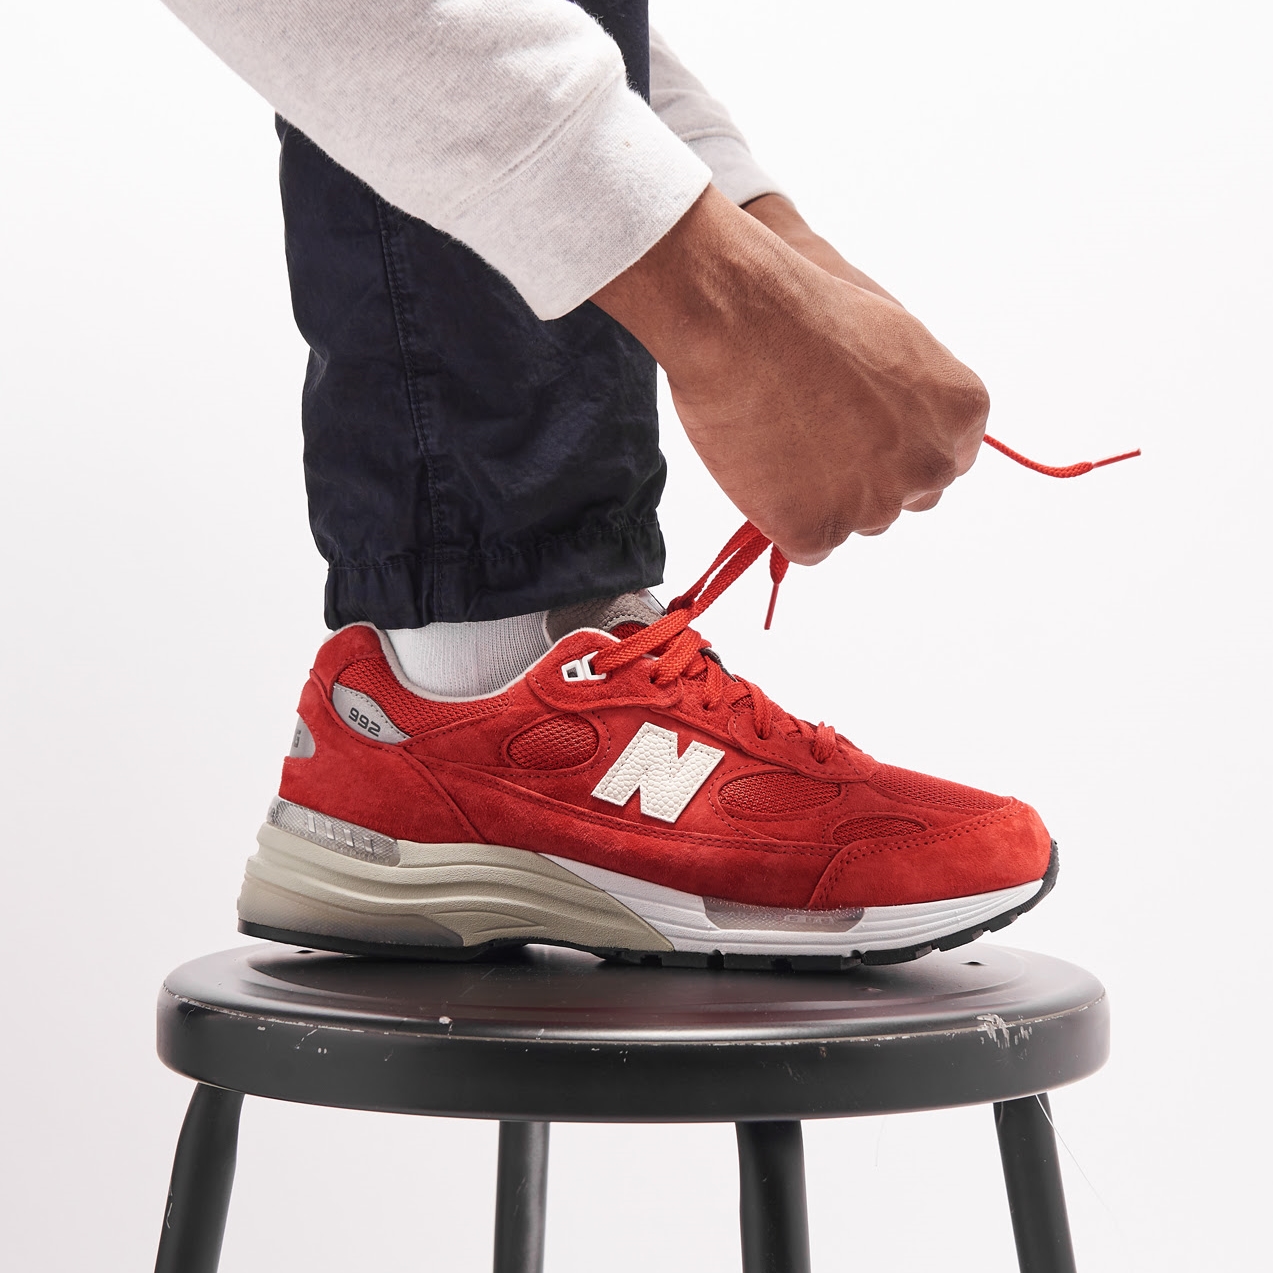 Ronnie Fieg and New Balance Offer Trio of “Kithmas” 992s